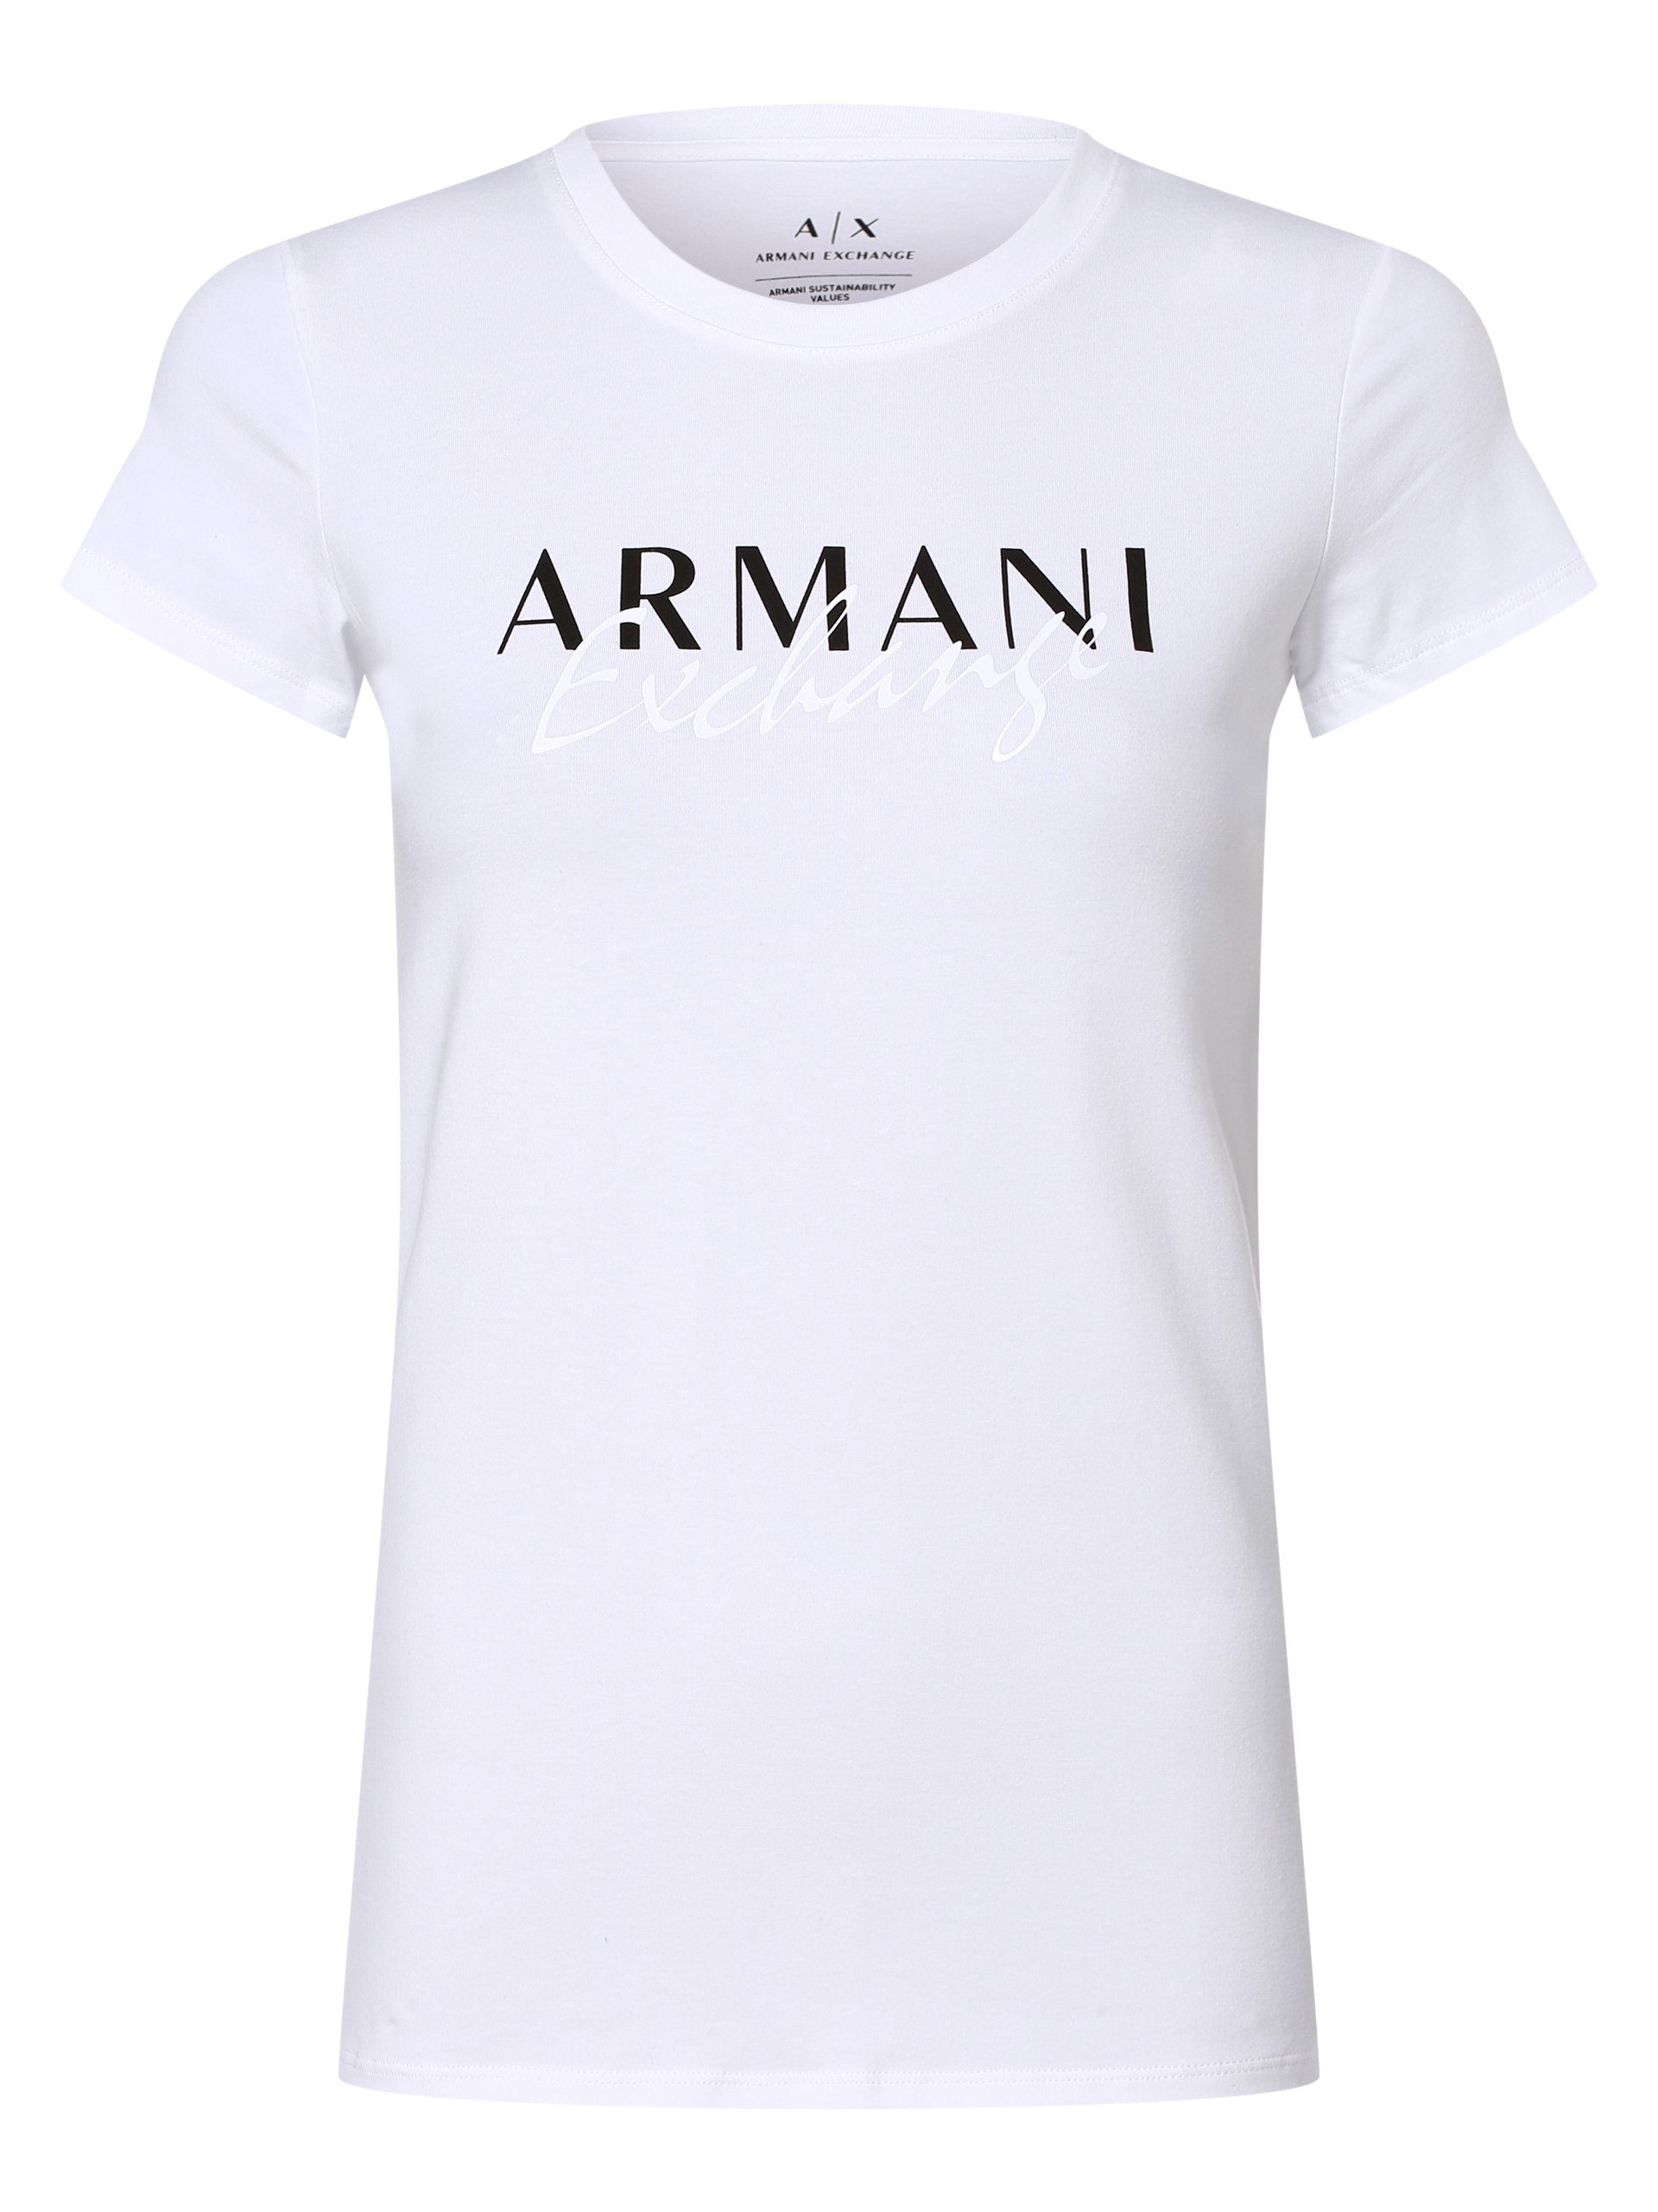 Armani Exchange T-Shirt weiß Connected